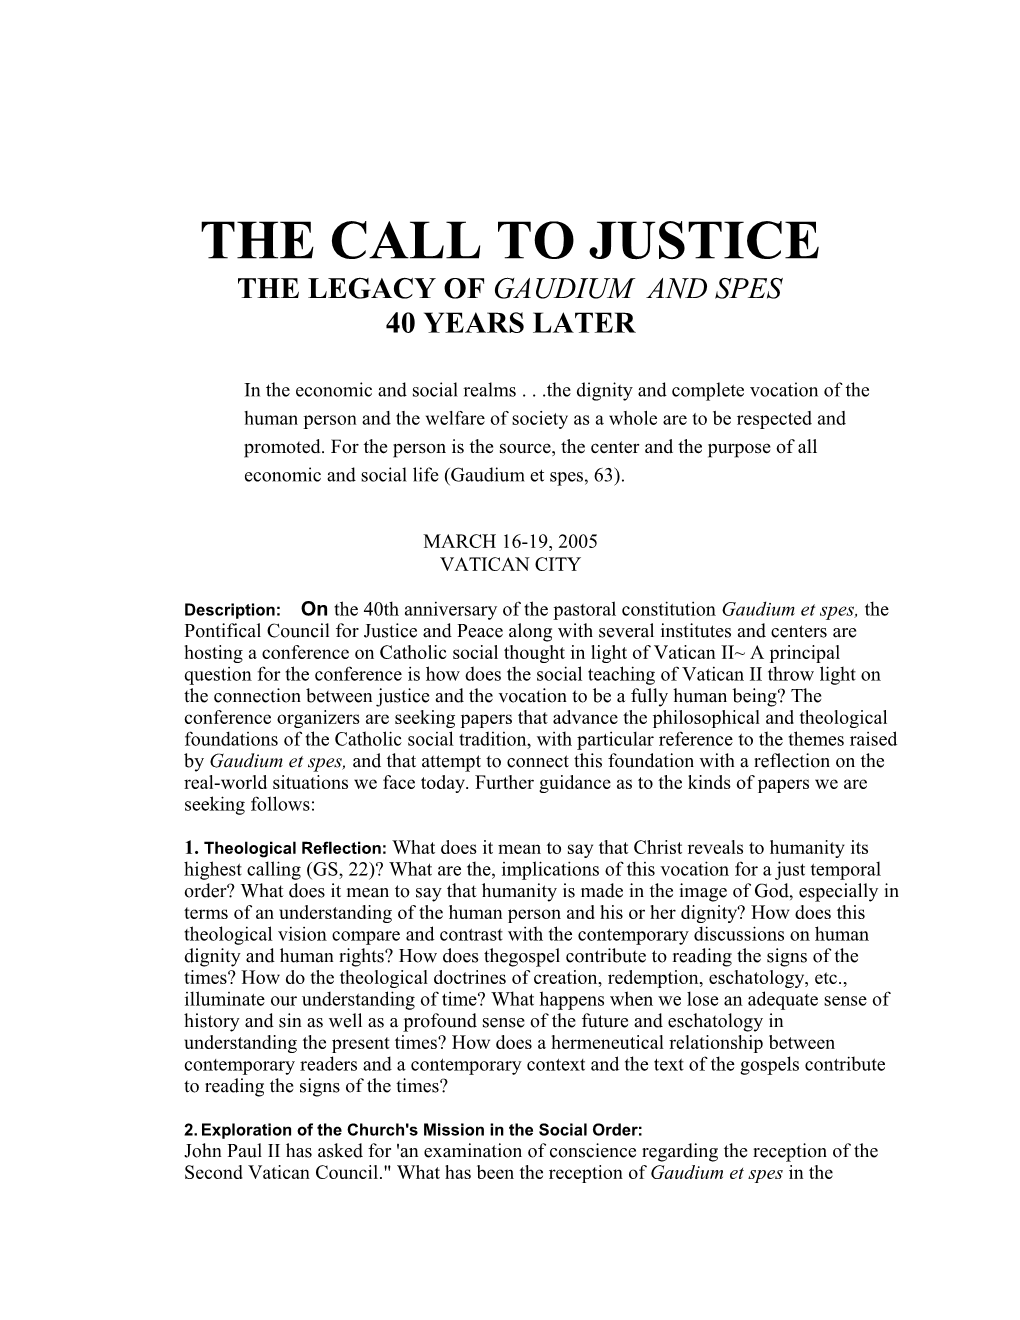 The Call to Justice